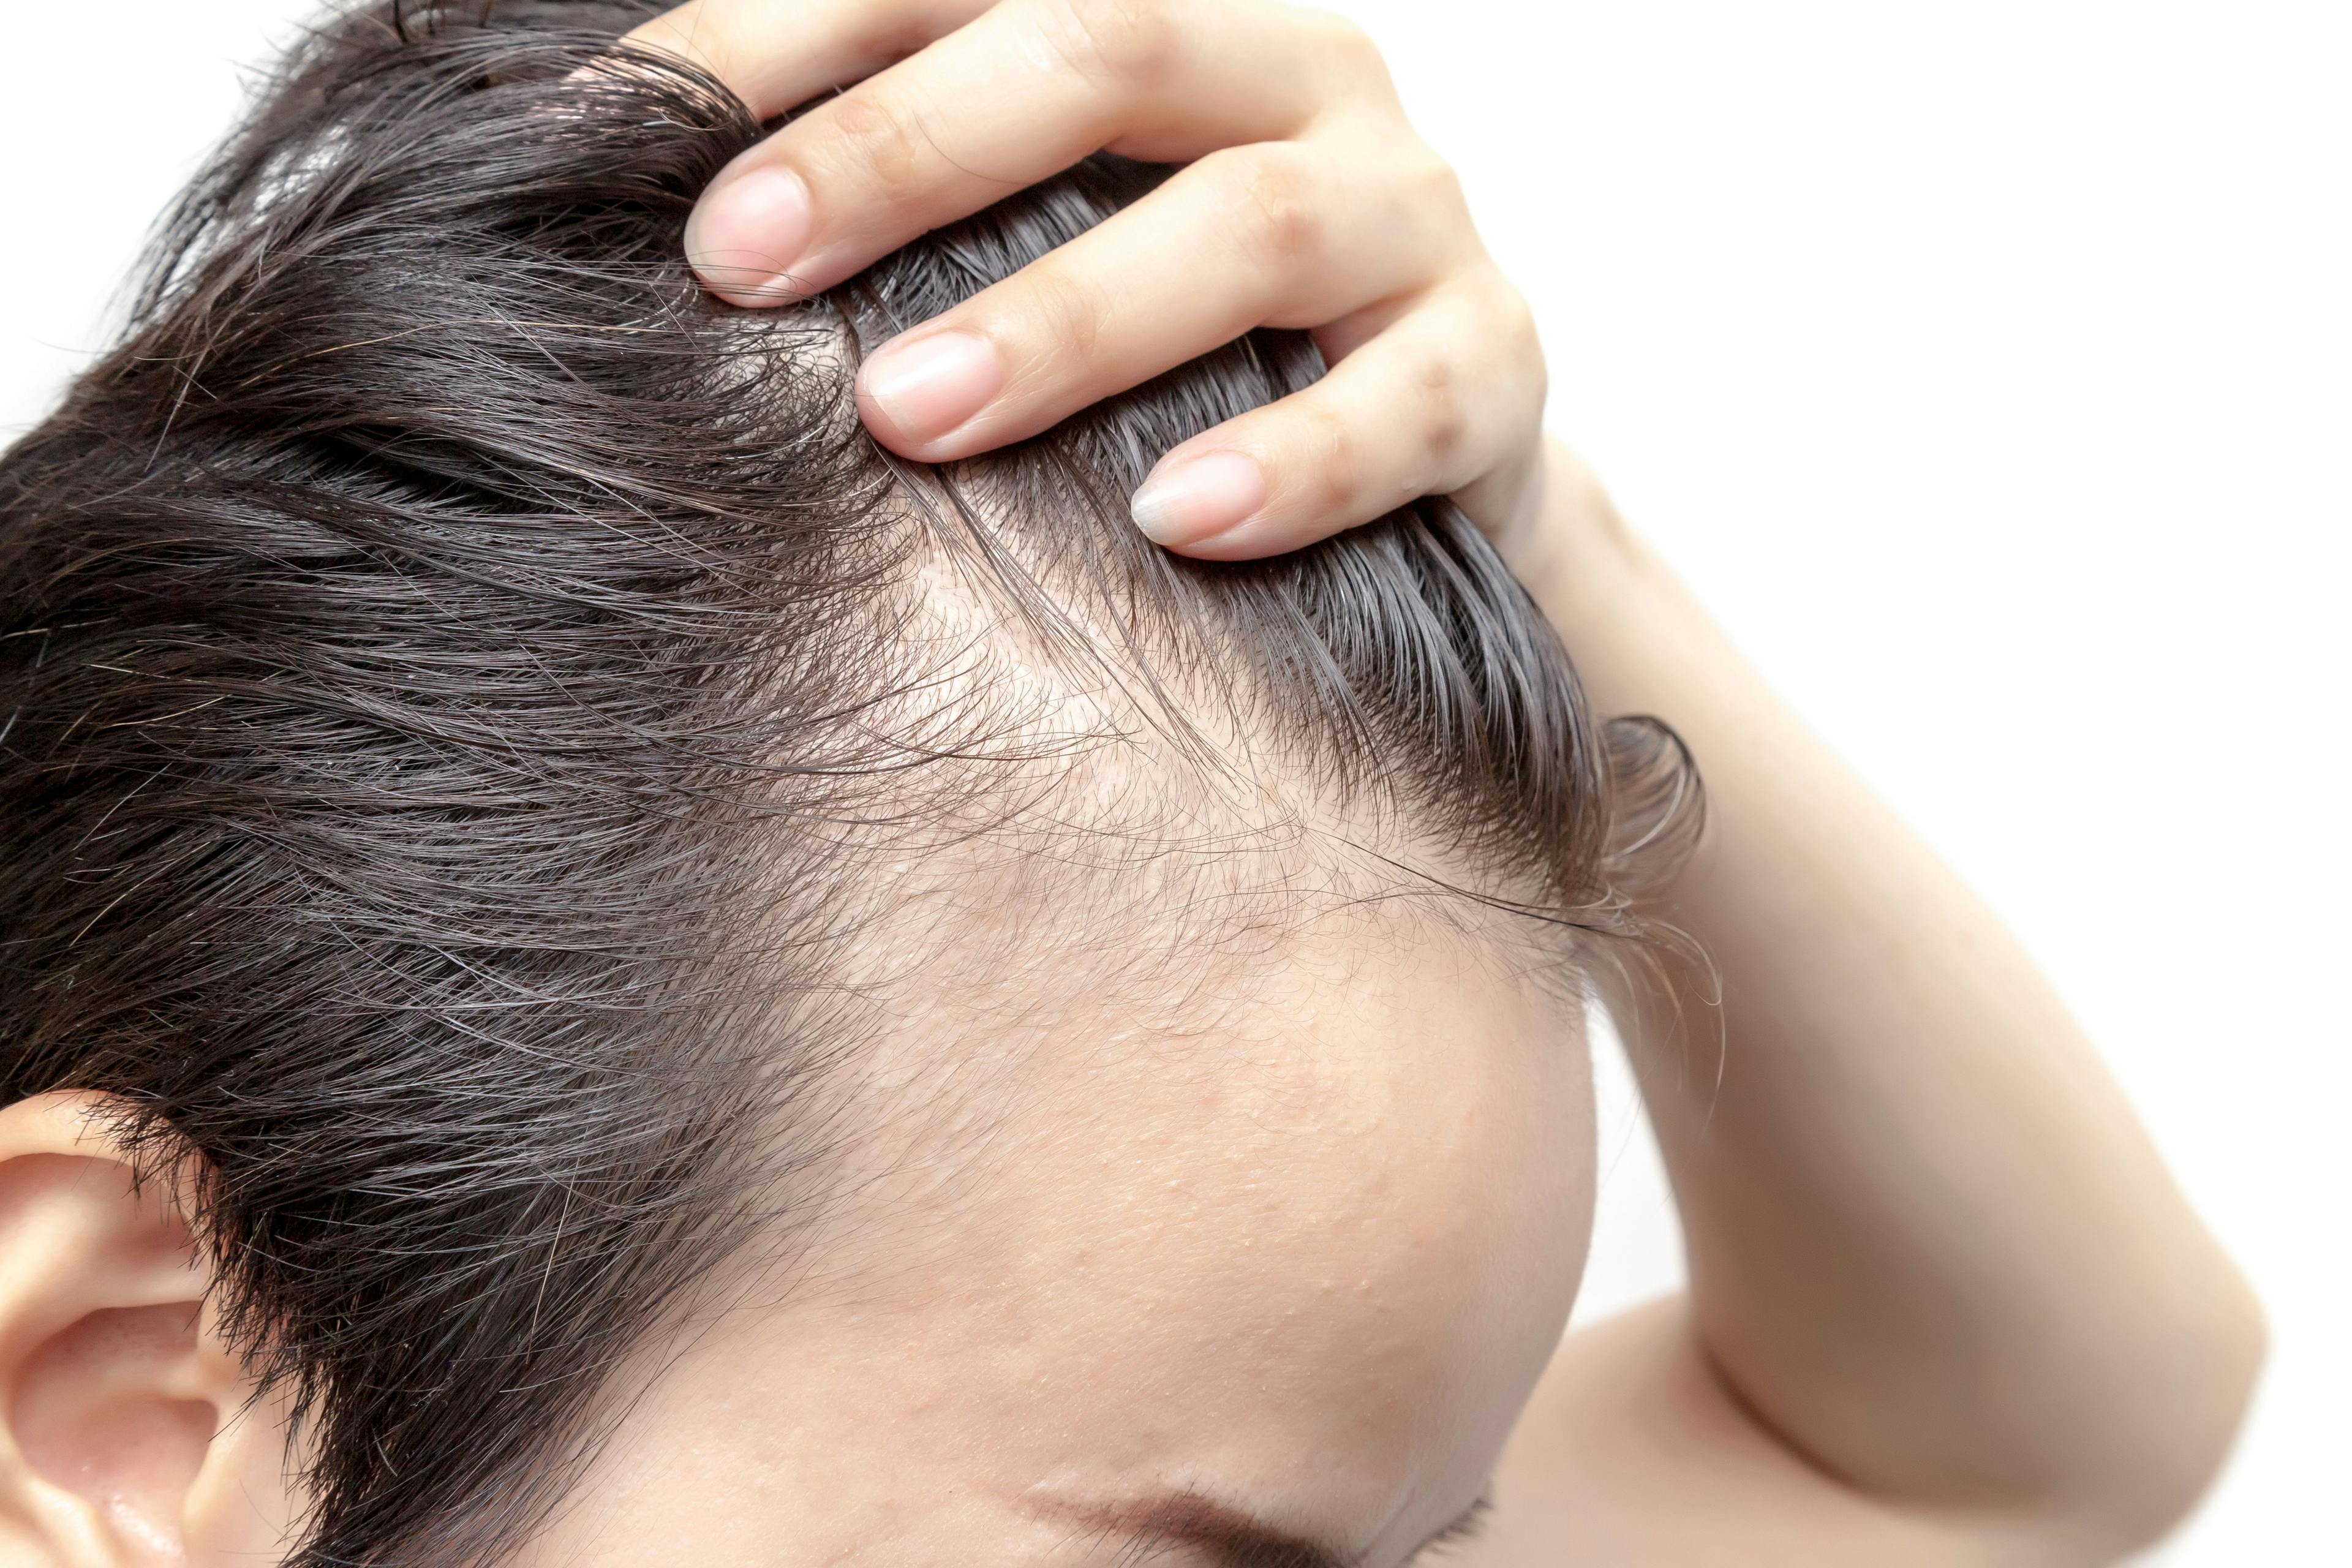 JAK Inhibitors Safe, Effective For Hair Growth in Patients With Alopecia Areata